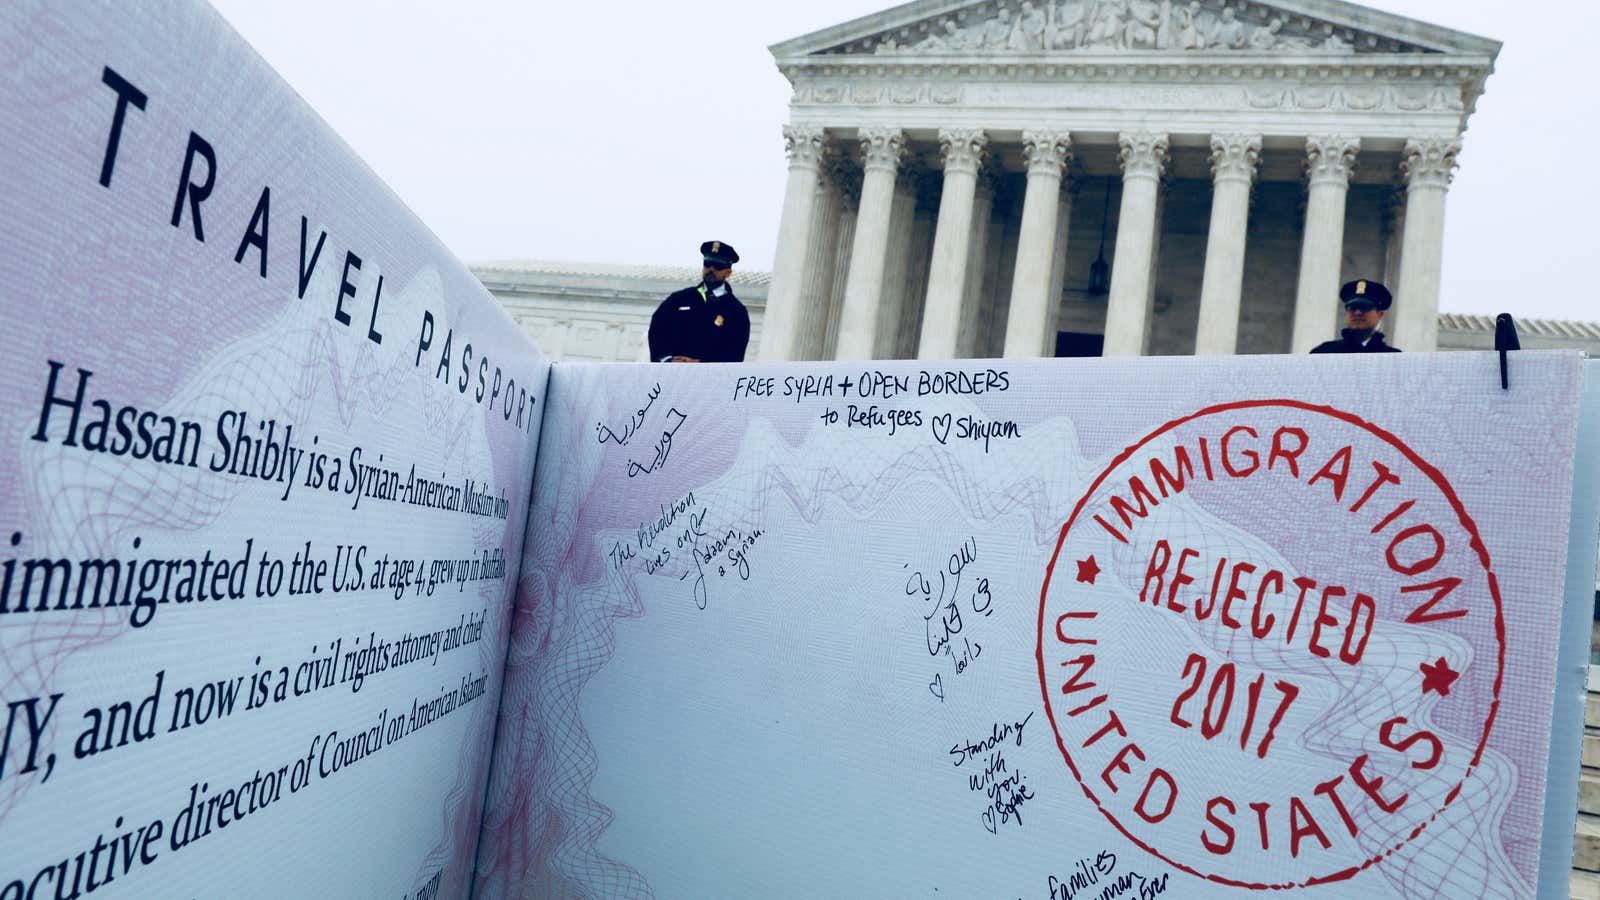 A mock-up of a banned Muslim traveler’s passport outside the US Supreme Court.